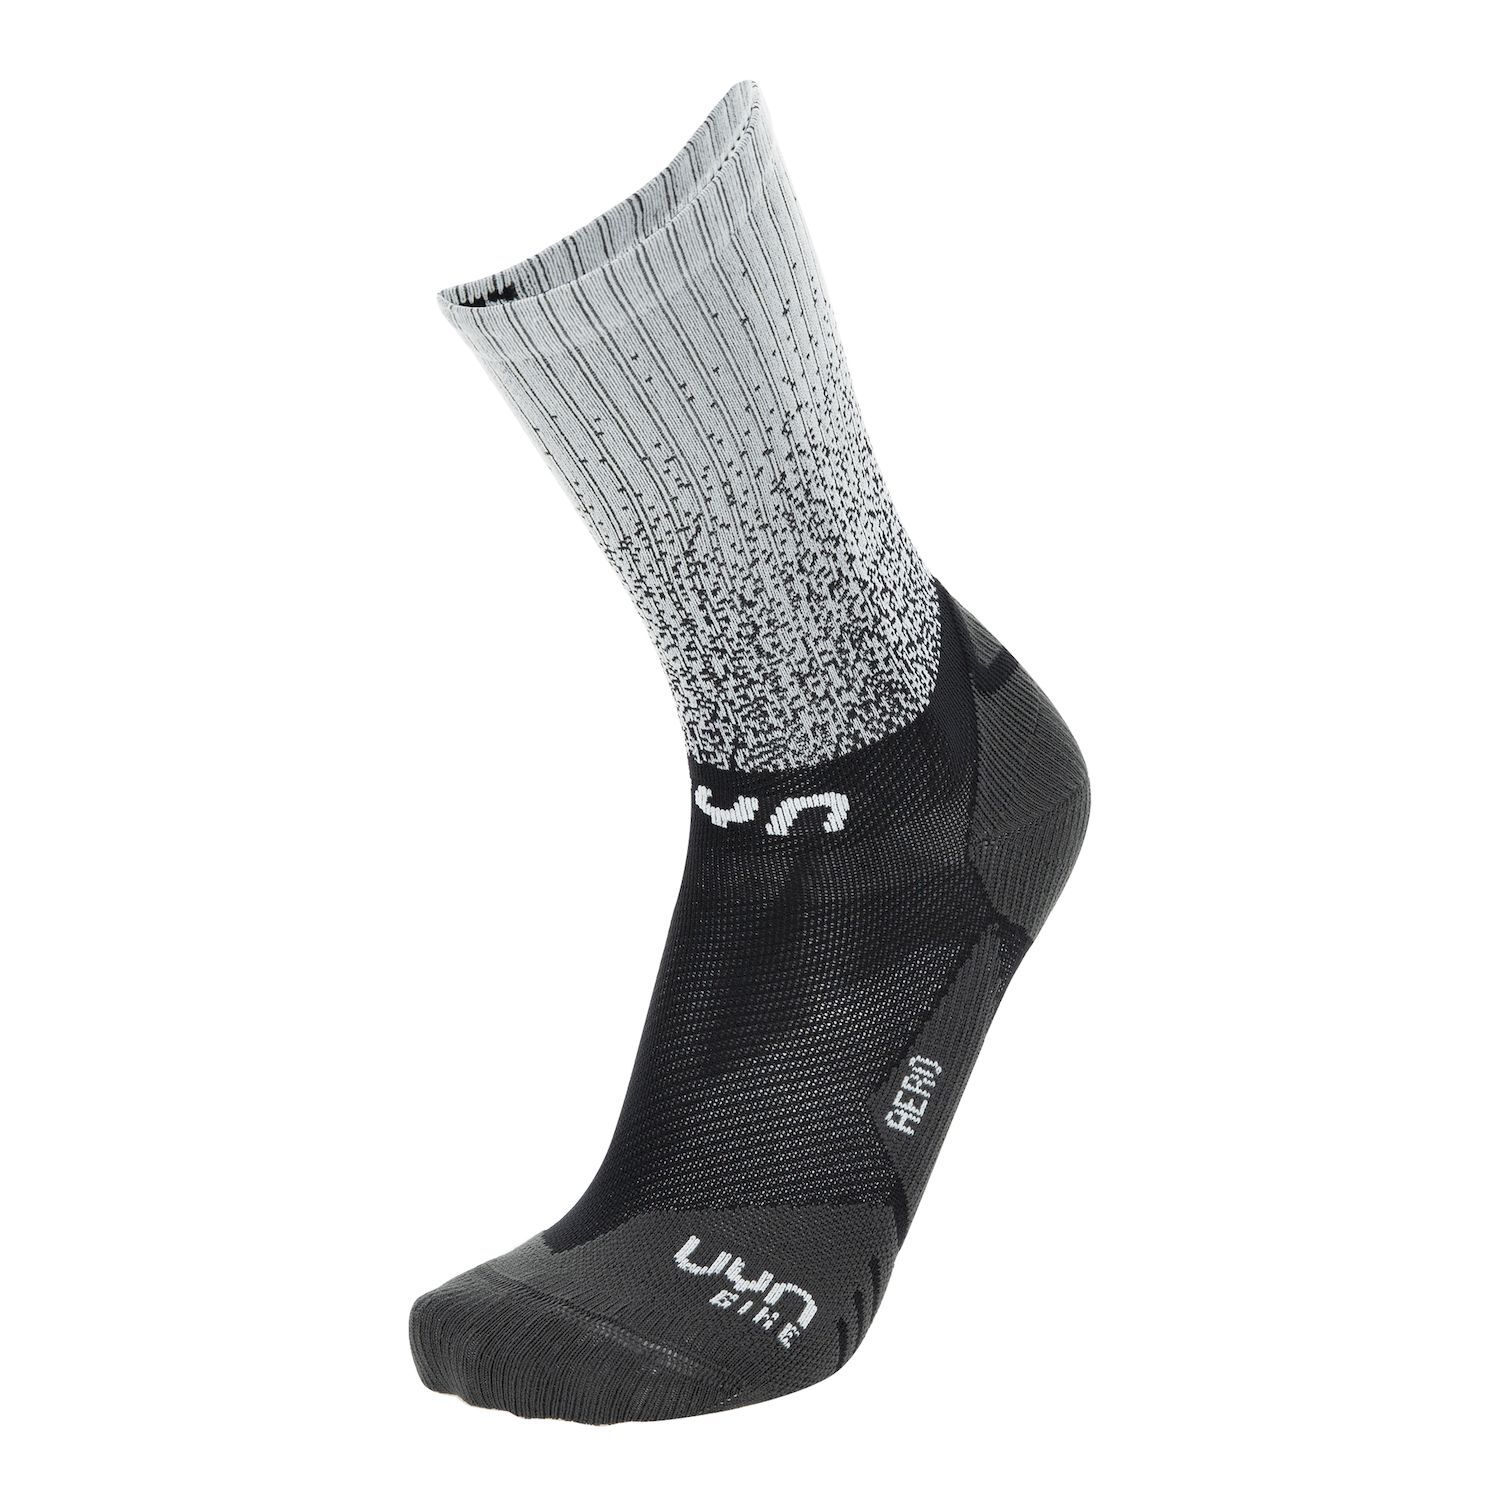 Uyn Man Cycling Aero - Calcetines ciclismo - Hombre